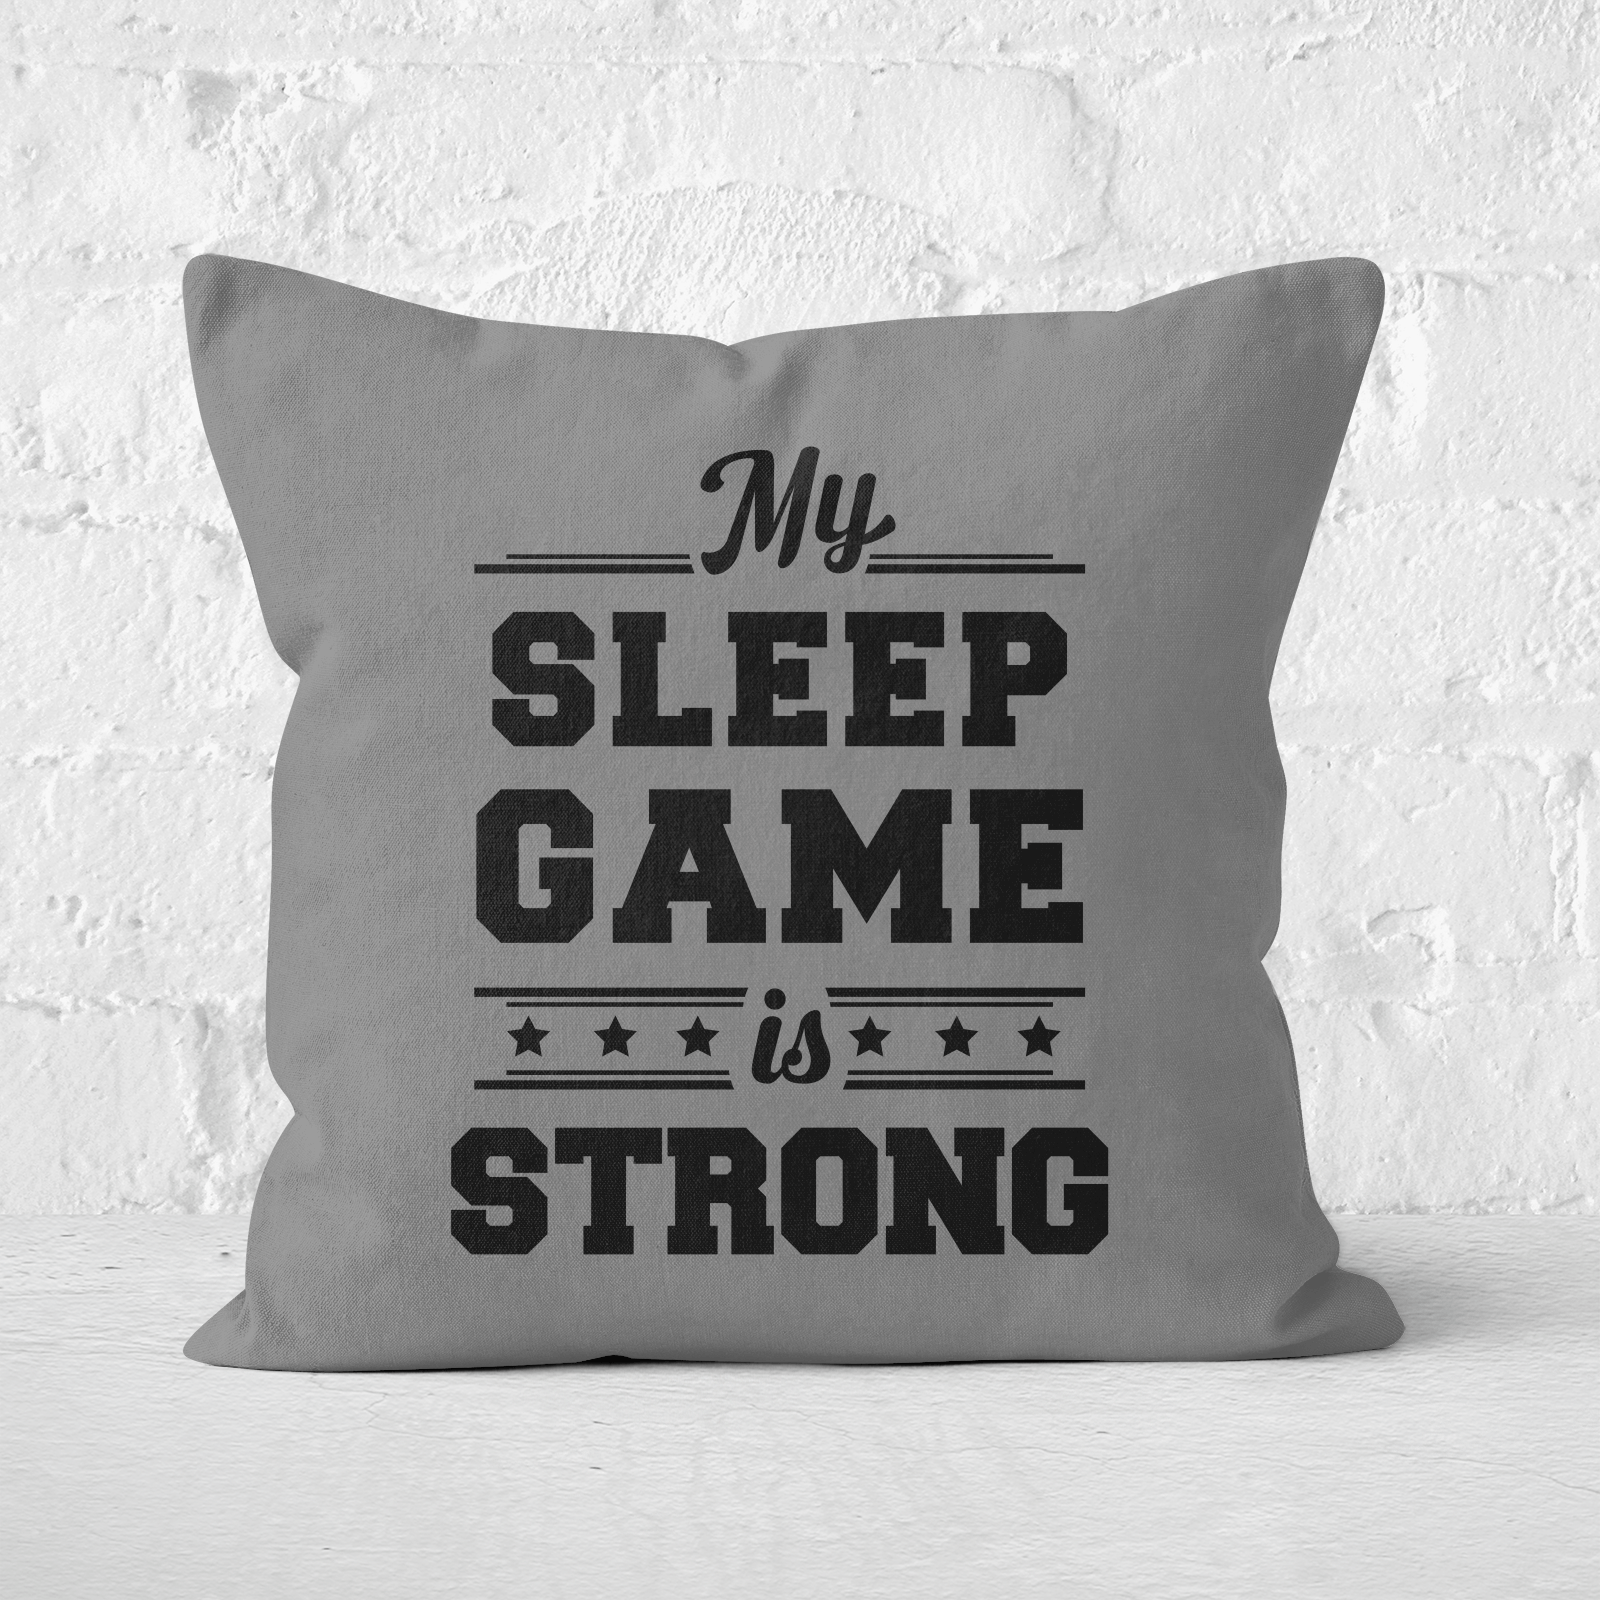 My Sleep Game Is Strong Square Cushion - 60x60cm - Soft Touch